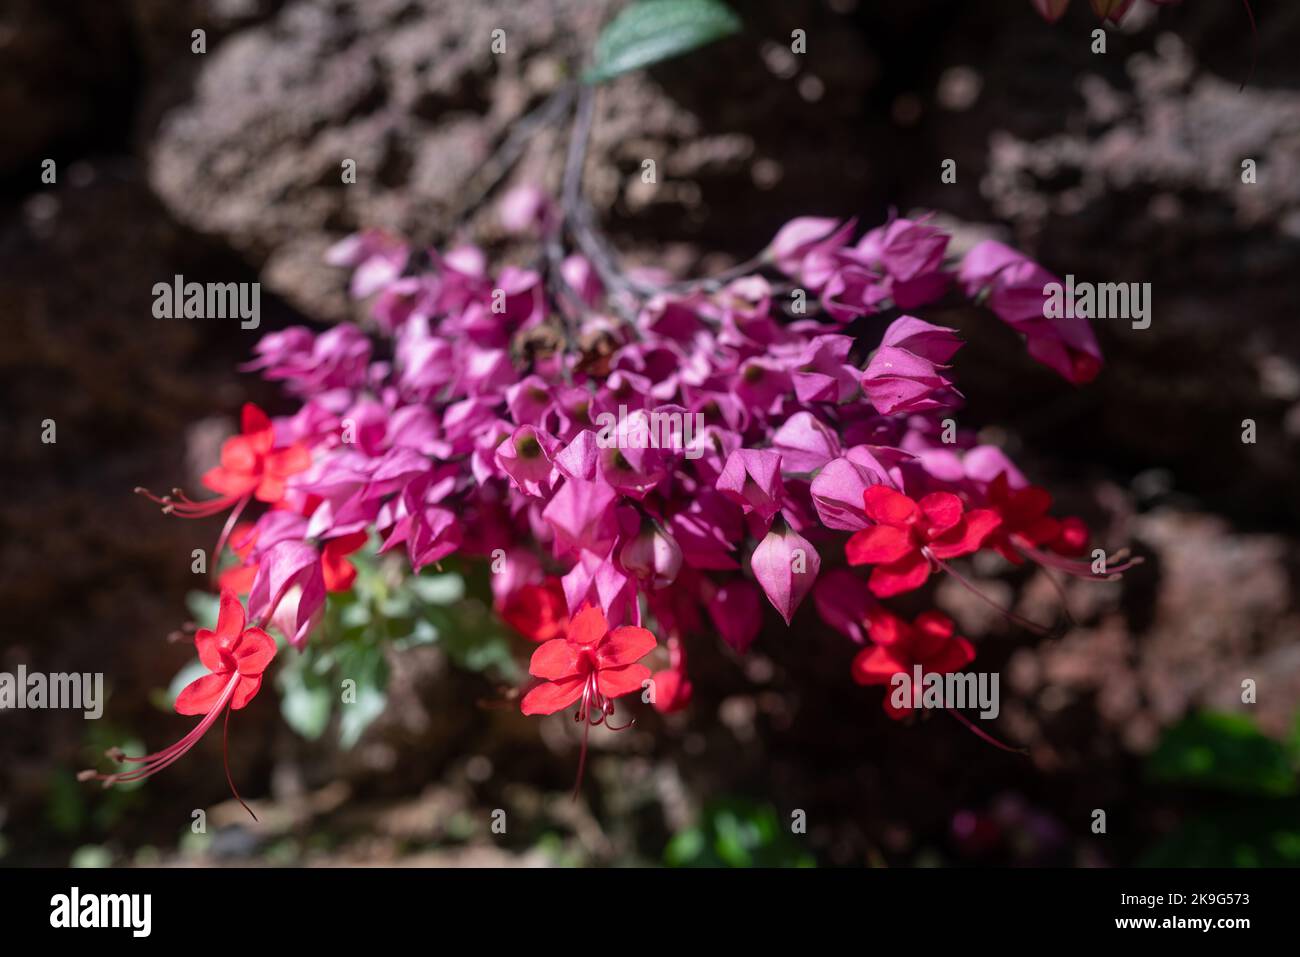 Mostly blurred bleeding heart vine flowers closeup. Purple and red blossoms Stock Photo